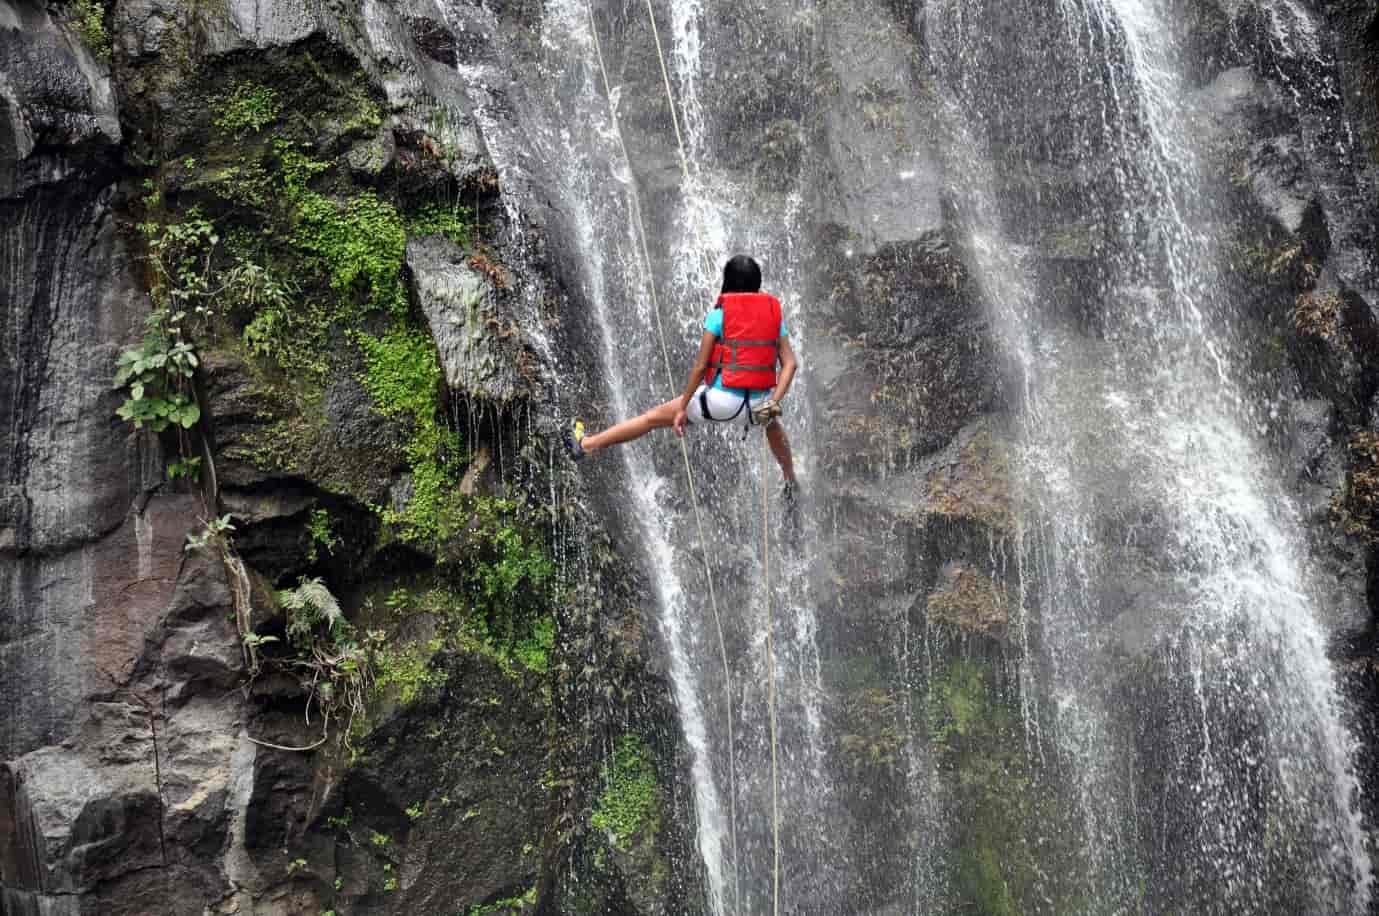 Chelavara-falls-rappelling-gives-you-an-opportunity-to-closely-admire-and-enjoy-the-waterfall